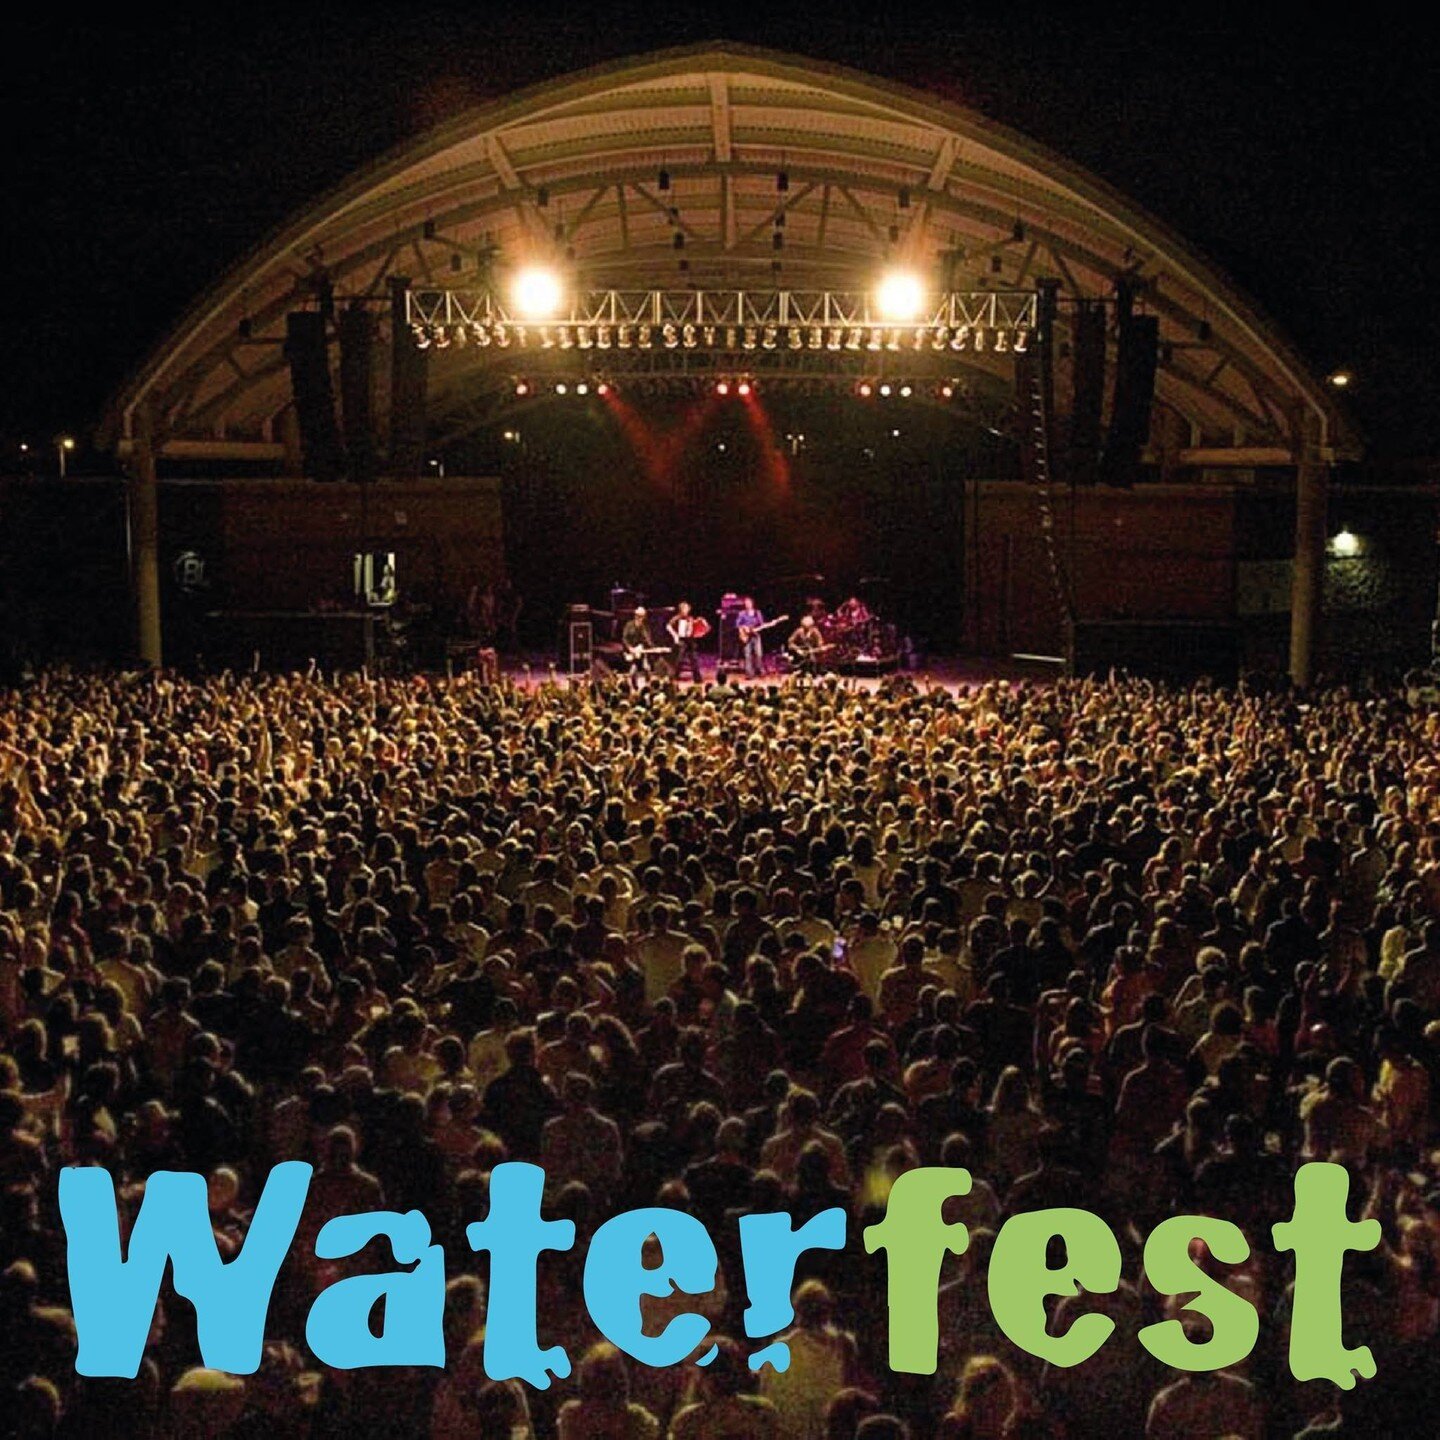 Waterfest is 2 days away!

🚨🚨 We currently 𝗦𝗧𝗜𝗟𝗟 𝗡𝗘𝗘𝗗 𝟮𝟬 𝗩𝗢𝗟𝗨𝗡𝗧𝗘𝗘𝗥𝗦 for the second shift from 7:30-10:15pm.  PLEASE, 𝗣𝗟𝗘𝗔𝗦𝗘, 𝙋𝙇𝙀𝘼𝙎𝙀 consider helping us out! 🚨🚨

If you are available, please visit oshkoshwestbands.